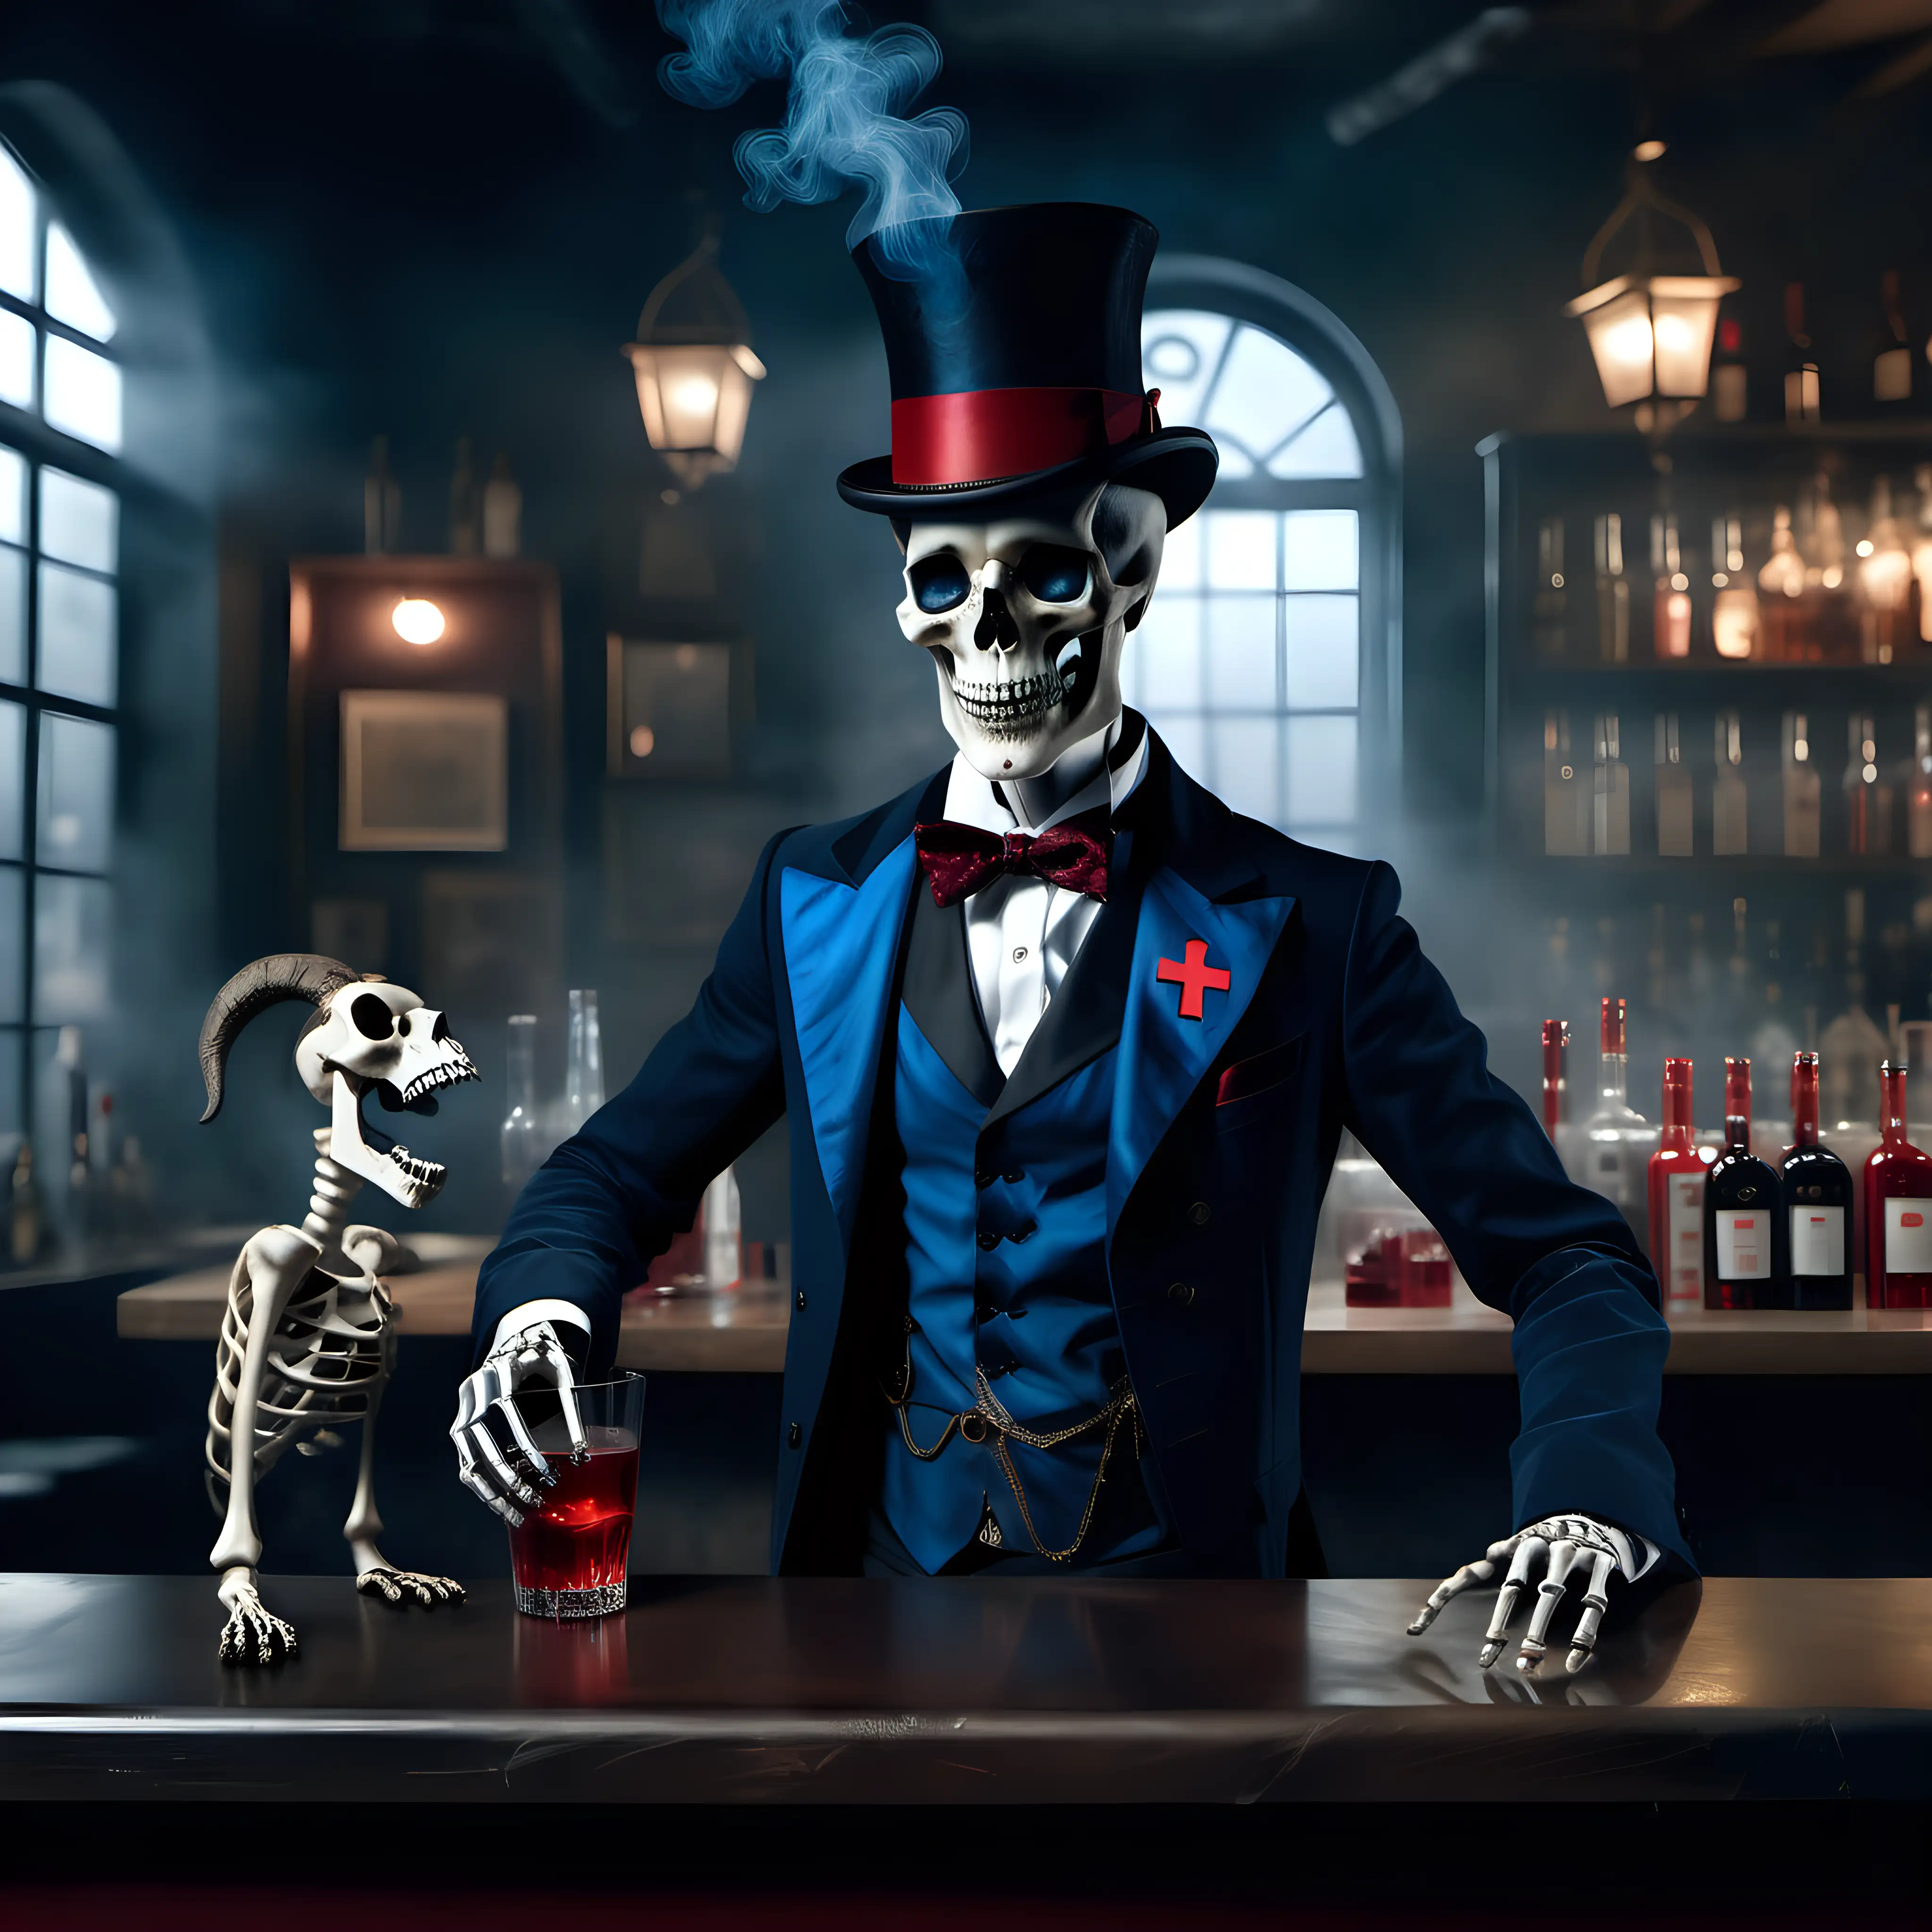 Elegant Skeleton in Morning Suit Enjoys a Surreal Bar Moment with Two Goats